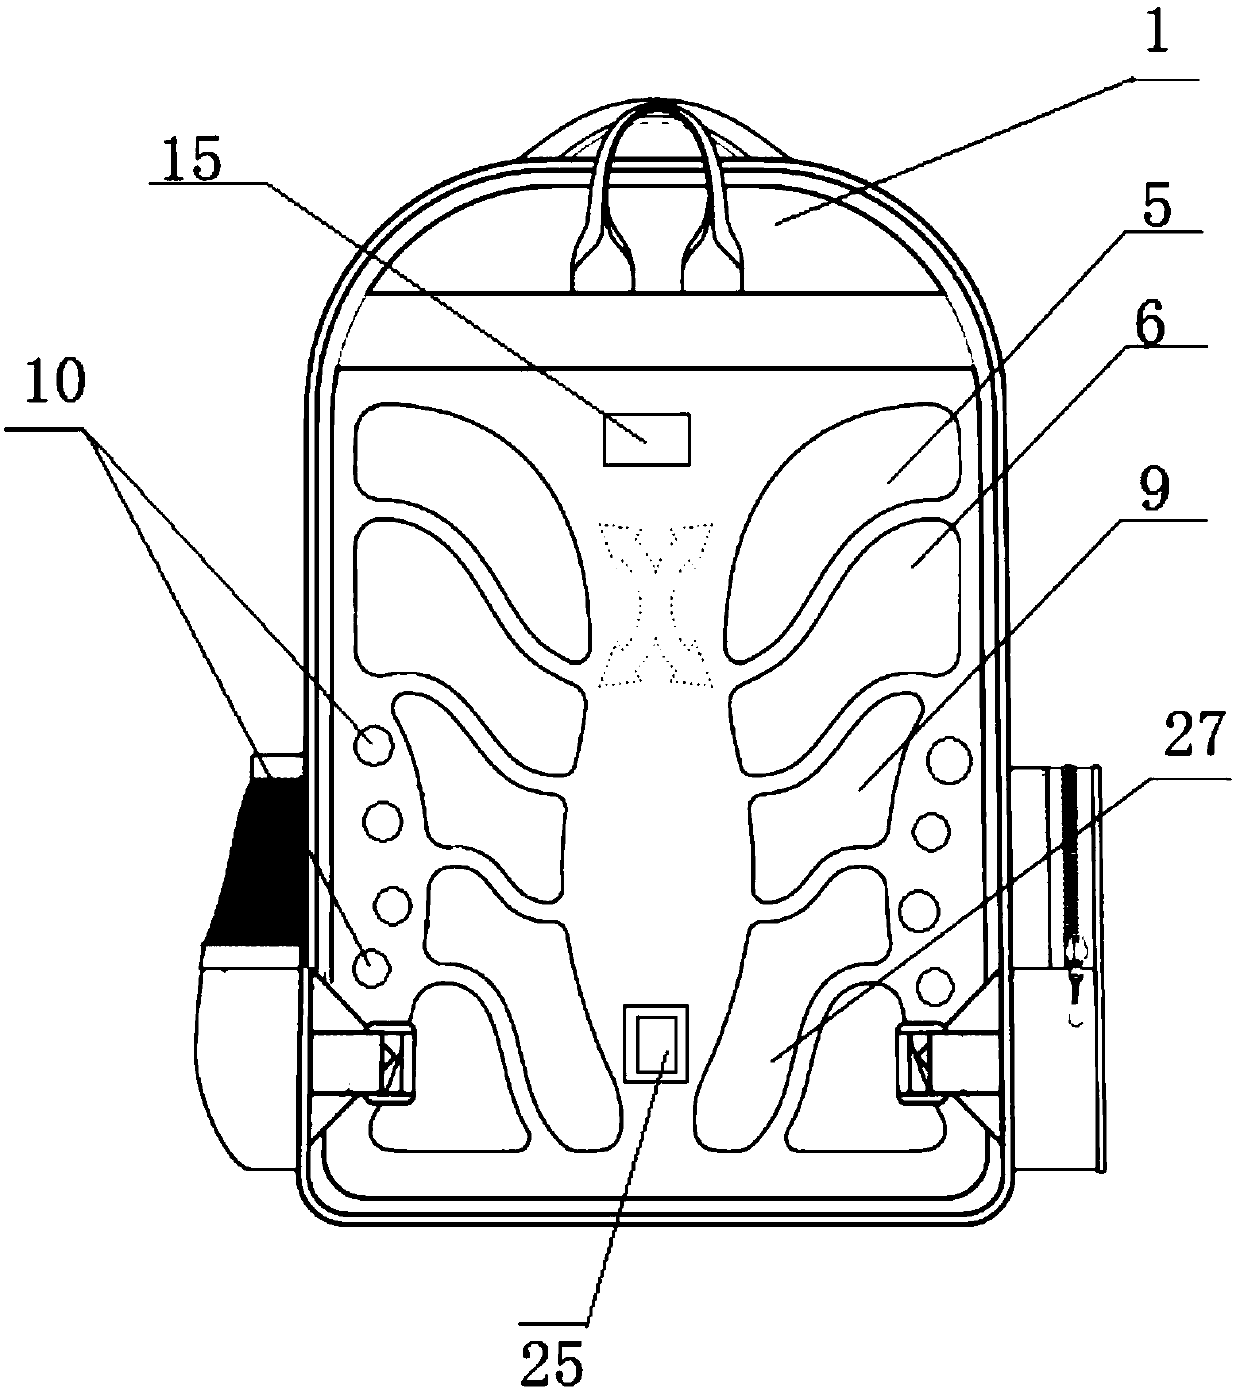 A traceable and early-warning smart spine-protecting backpack